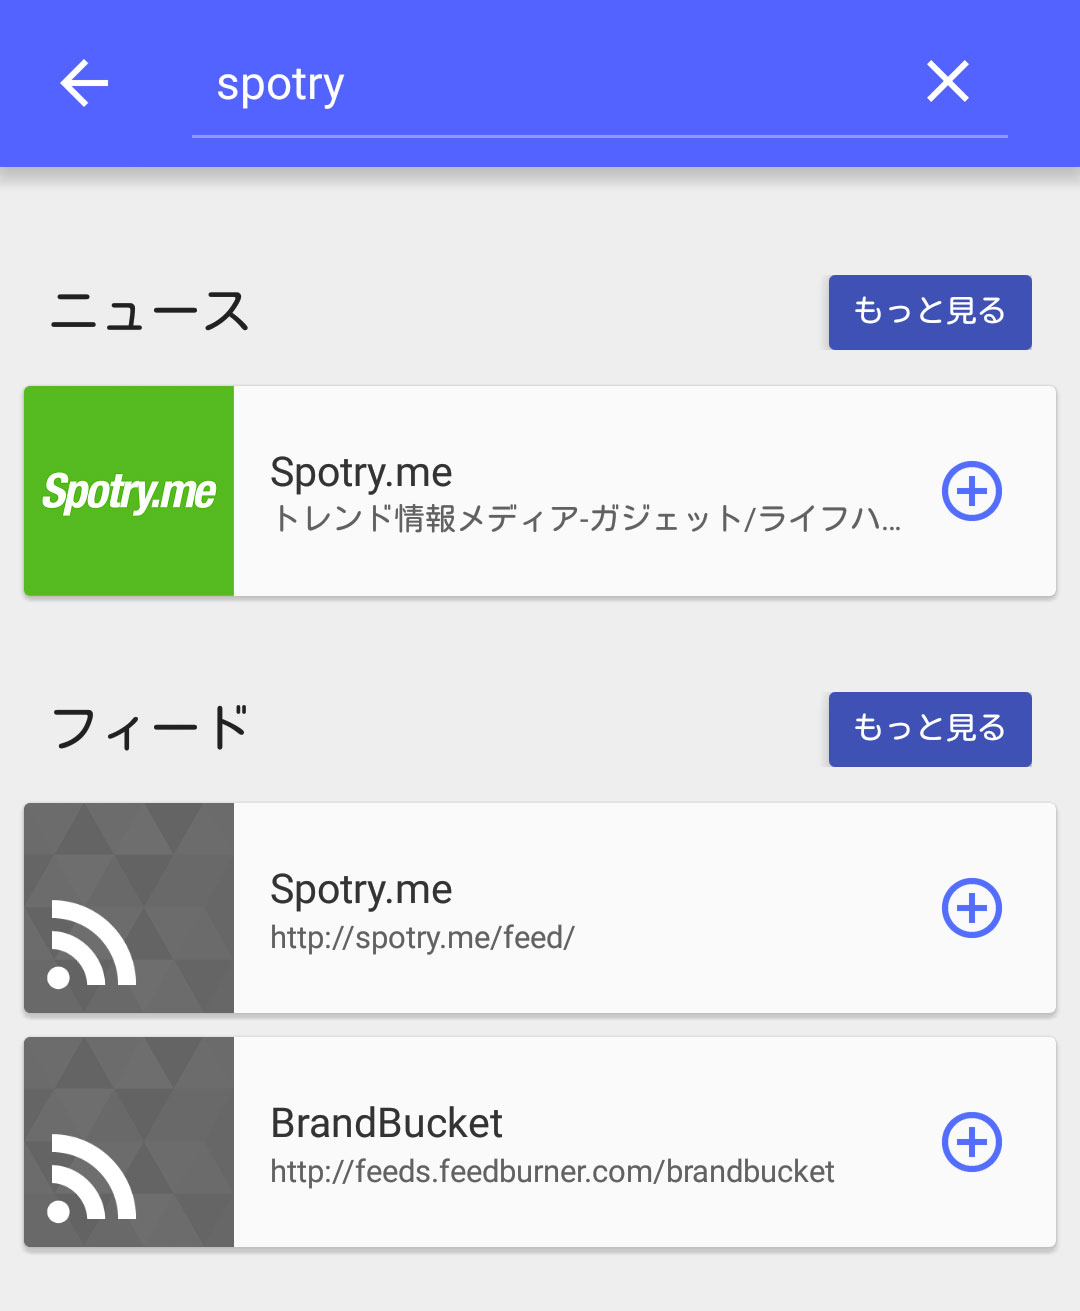 google play newsstand support spotryme media catalogue